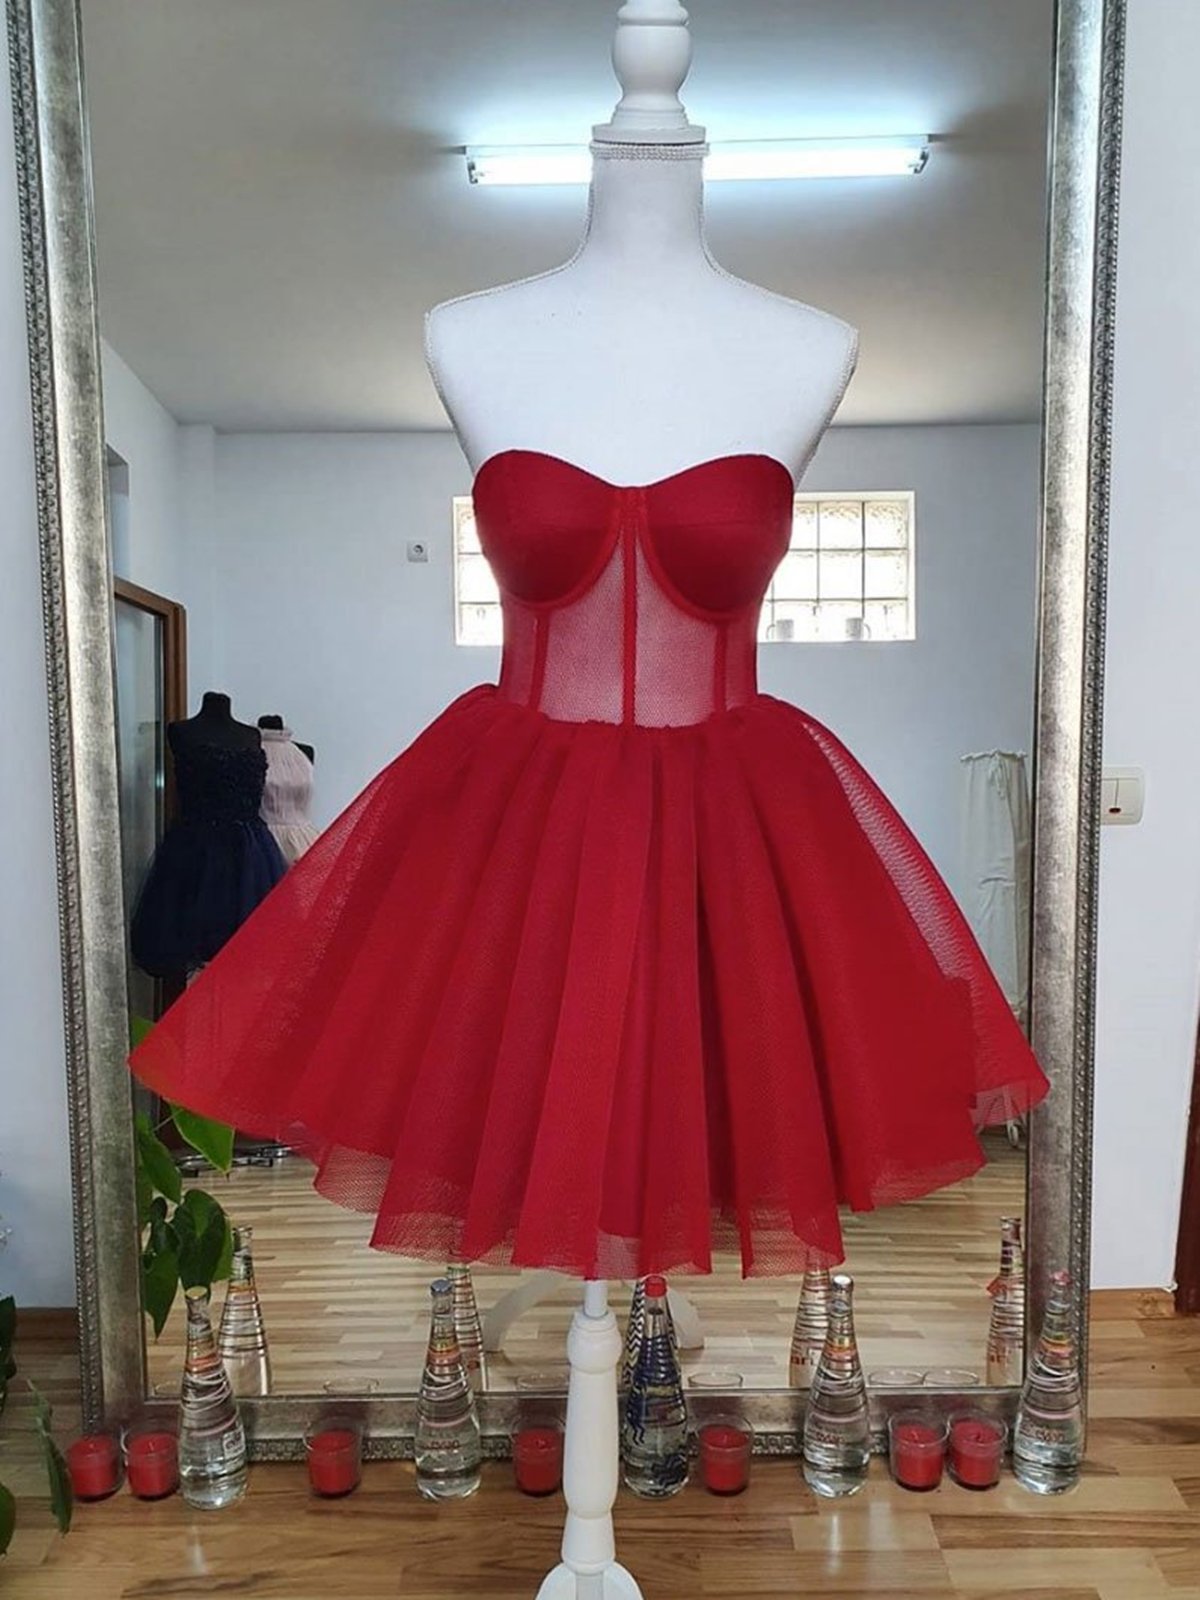 Sweetheart Neck Short Red Prom Dresses, Short Red Formal Graduation Homecoming Dresses